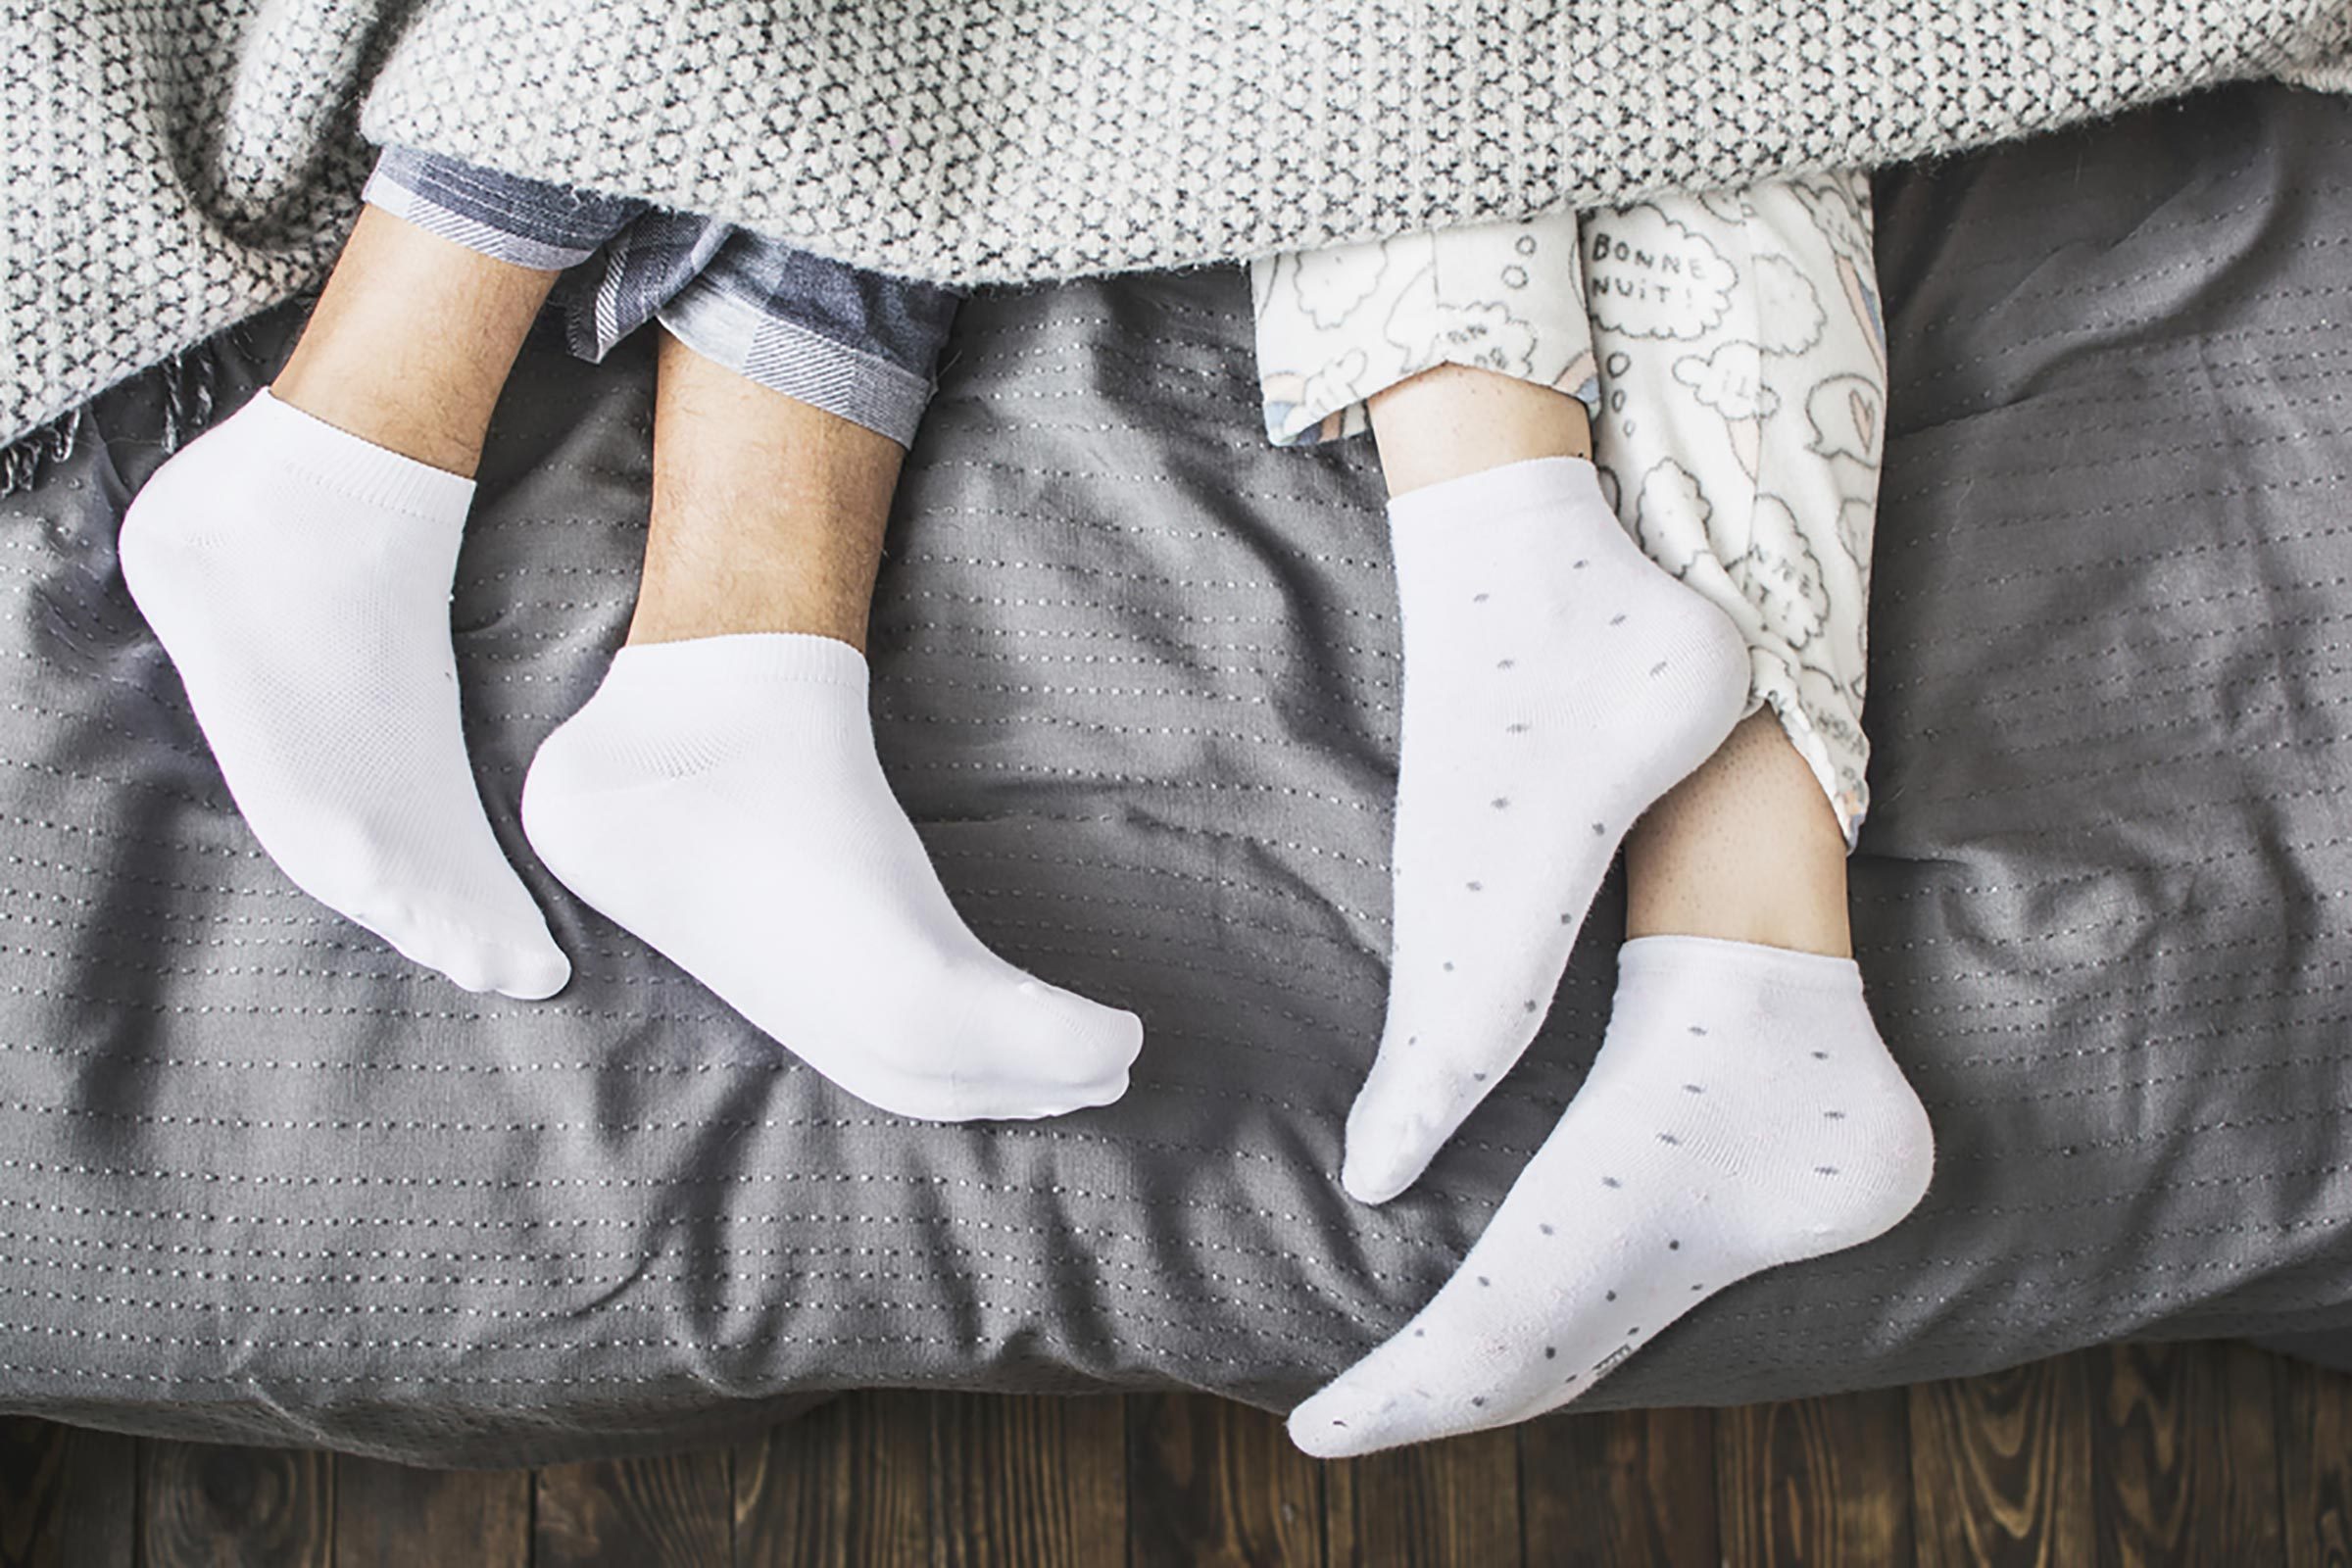 If You Don't Sleep with Socks On, Here's Why You Should Start Tonight